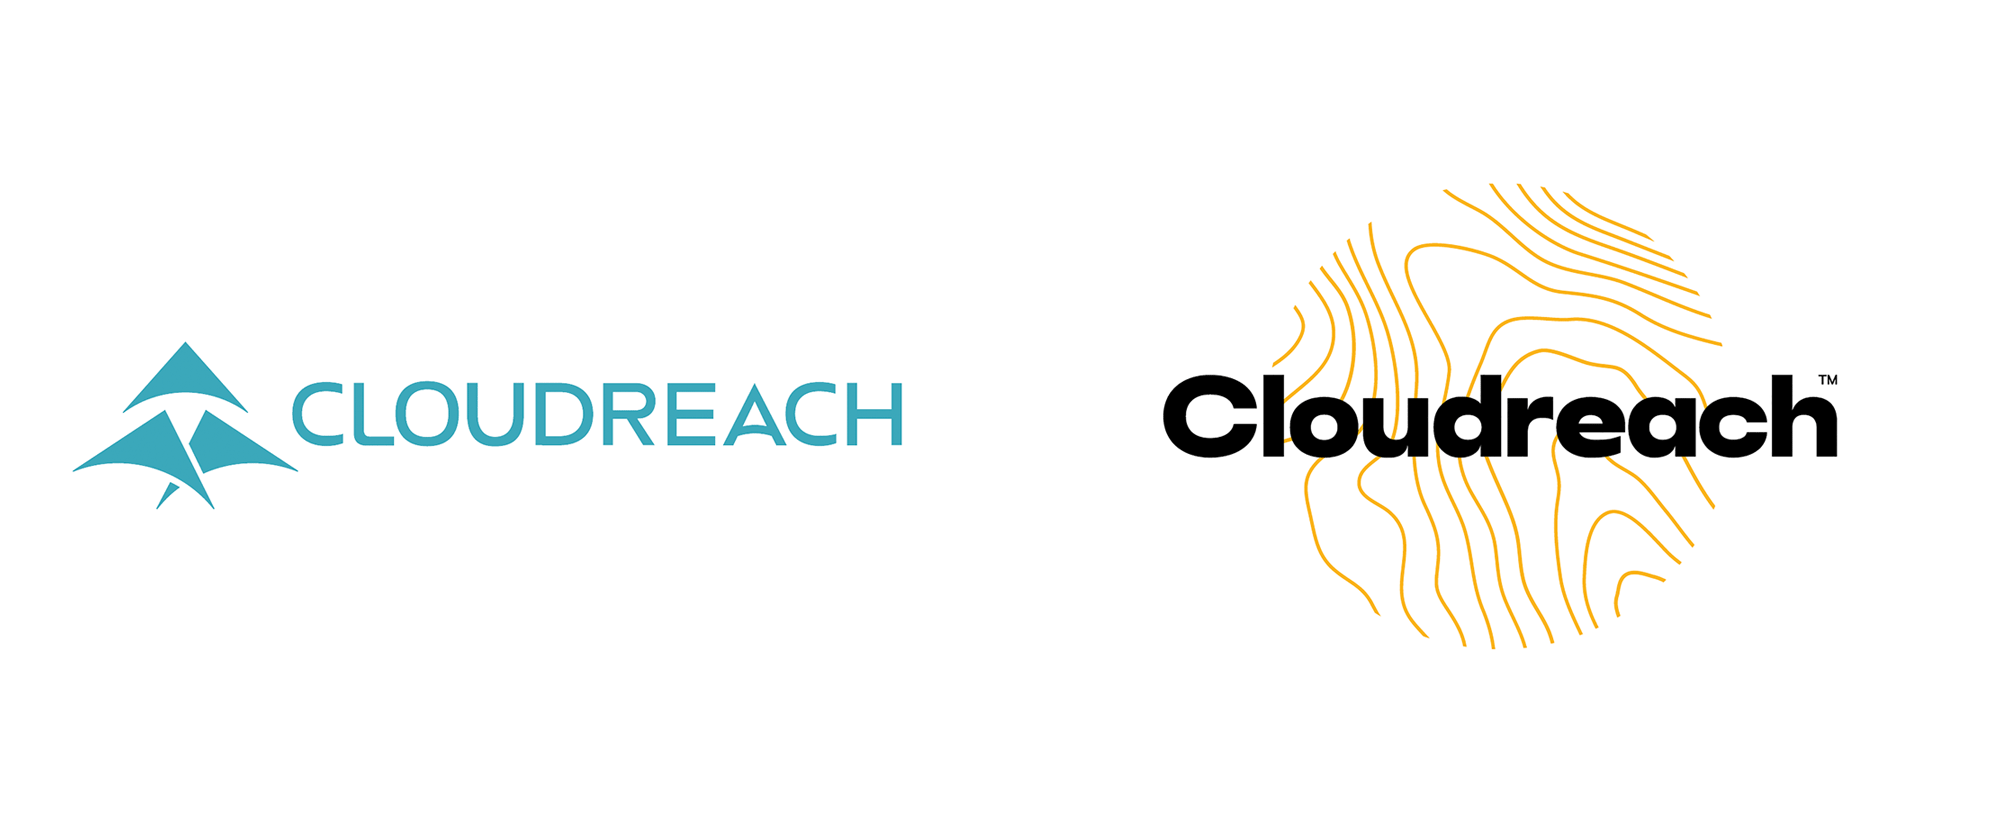 New Logo and Identity for Cloudreach by Siegel+Gale